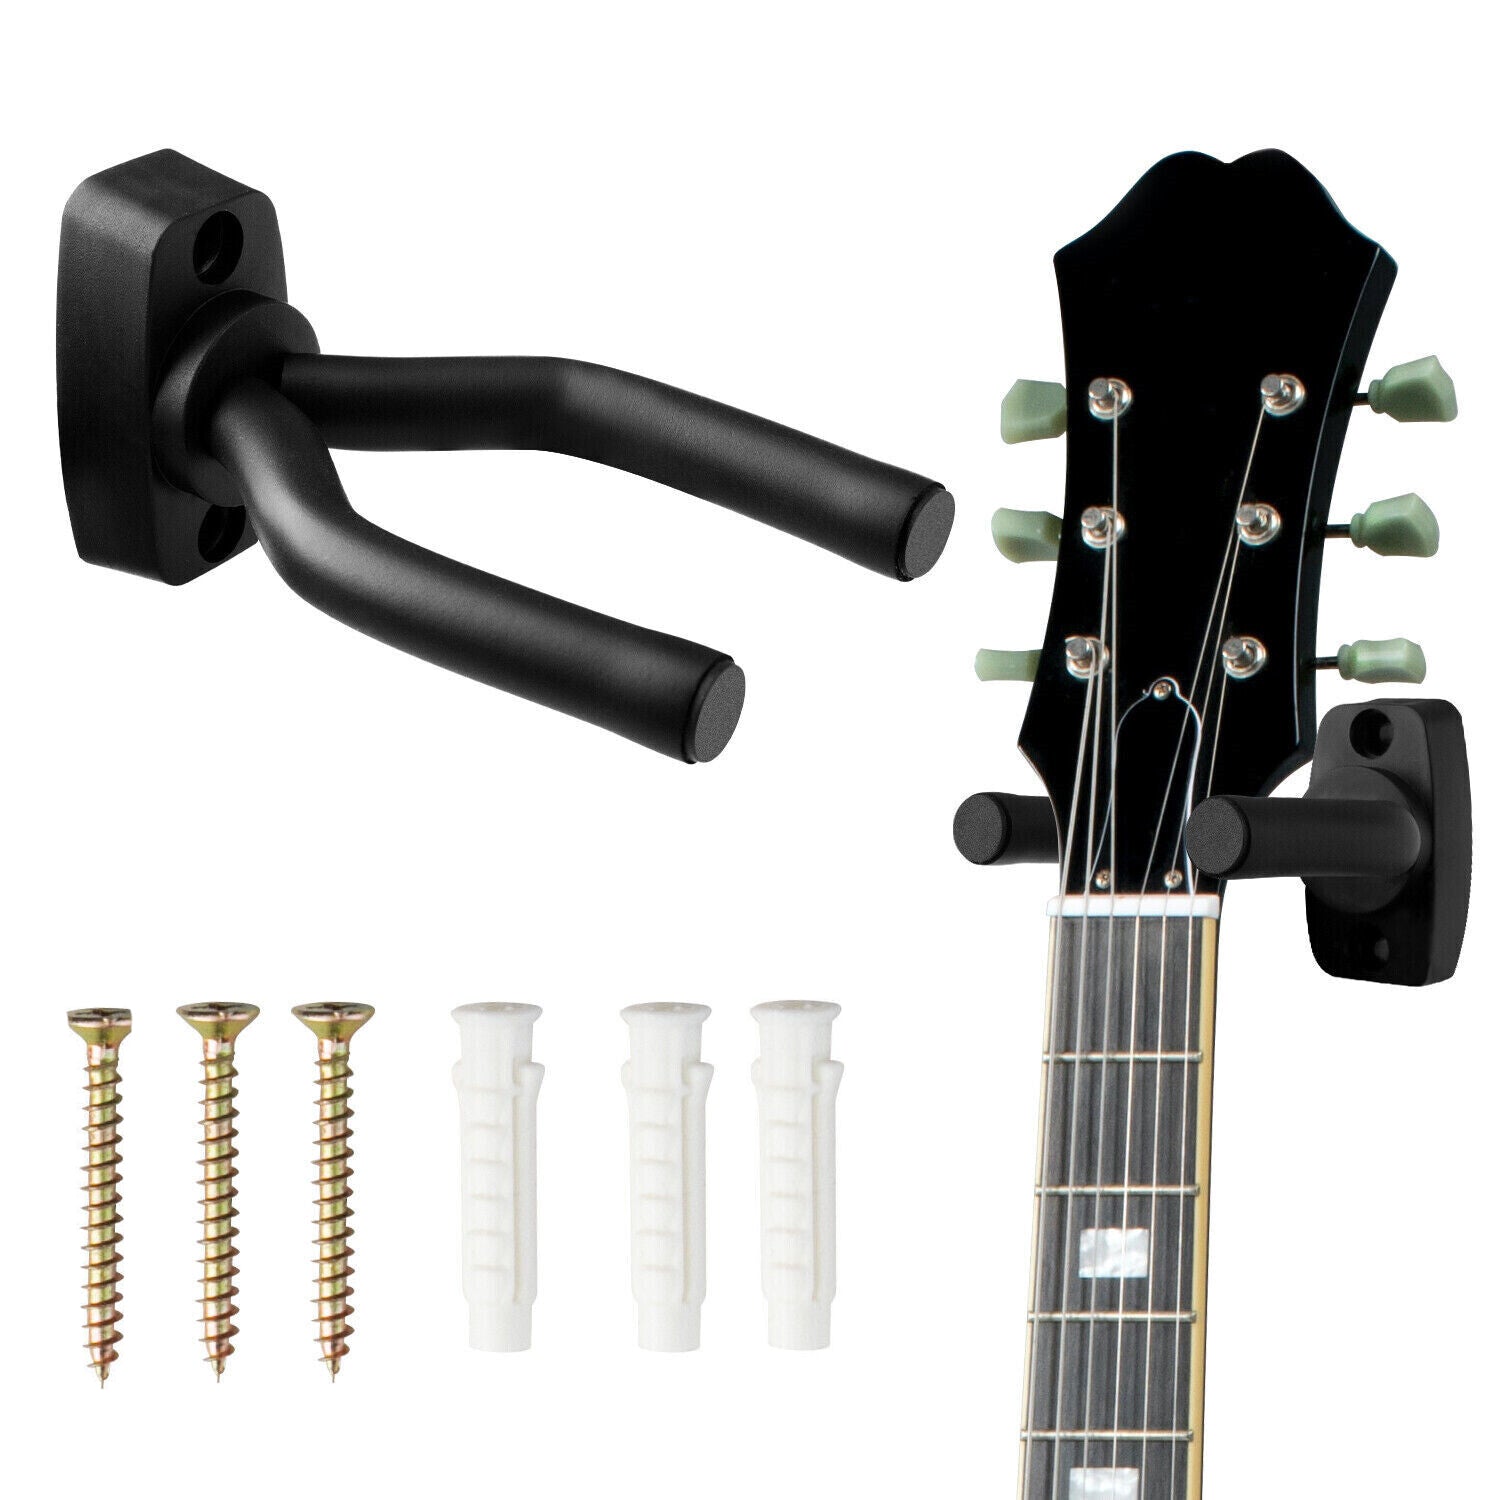 5 Core Guitar Wall Mount | Metal Guitar Hanger with Rotatable Soft Hook for All Size Guitars| Sturdy U-Shaped Holder | For Acoustic, Electric, Bass Guitar, violins, mandolins, ukuleles- GH IRON 1PC